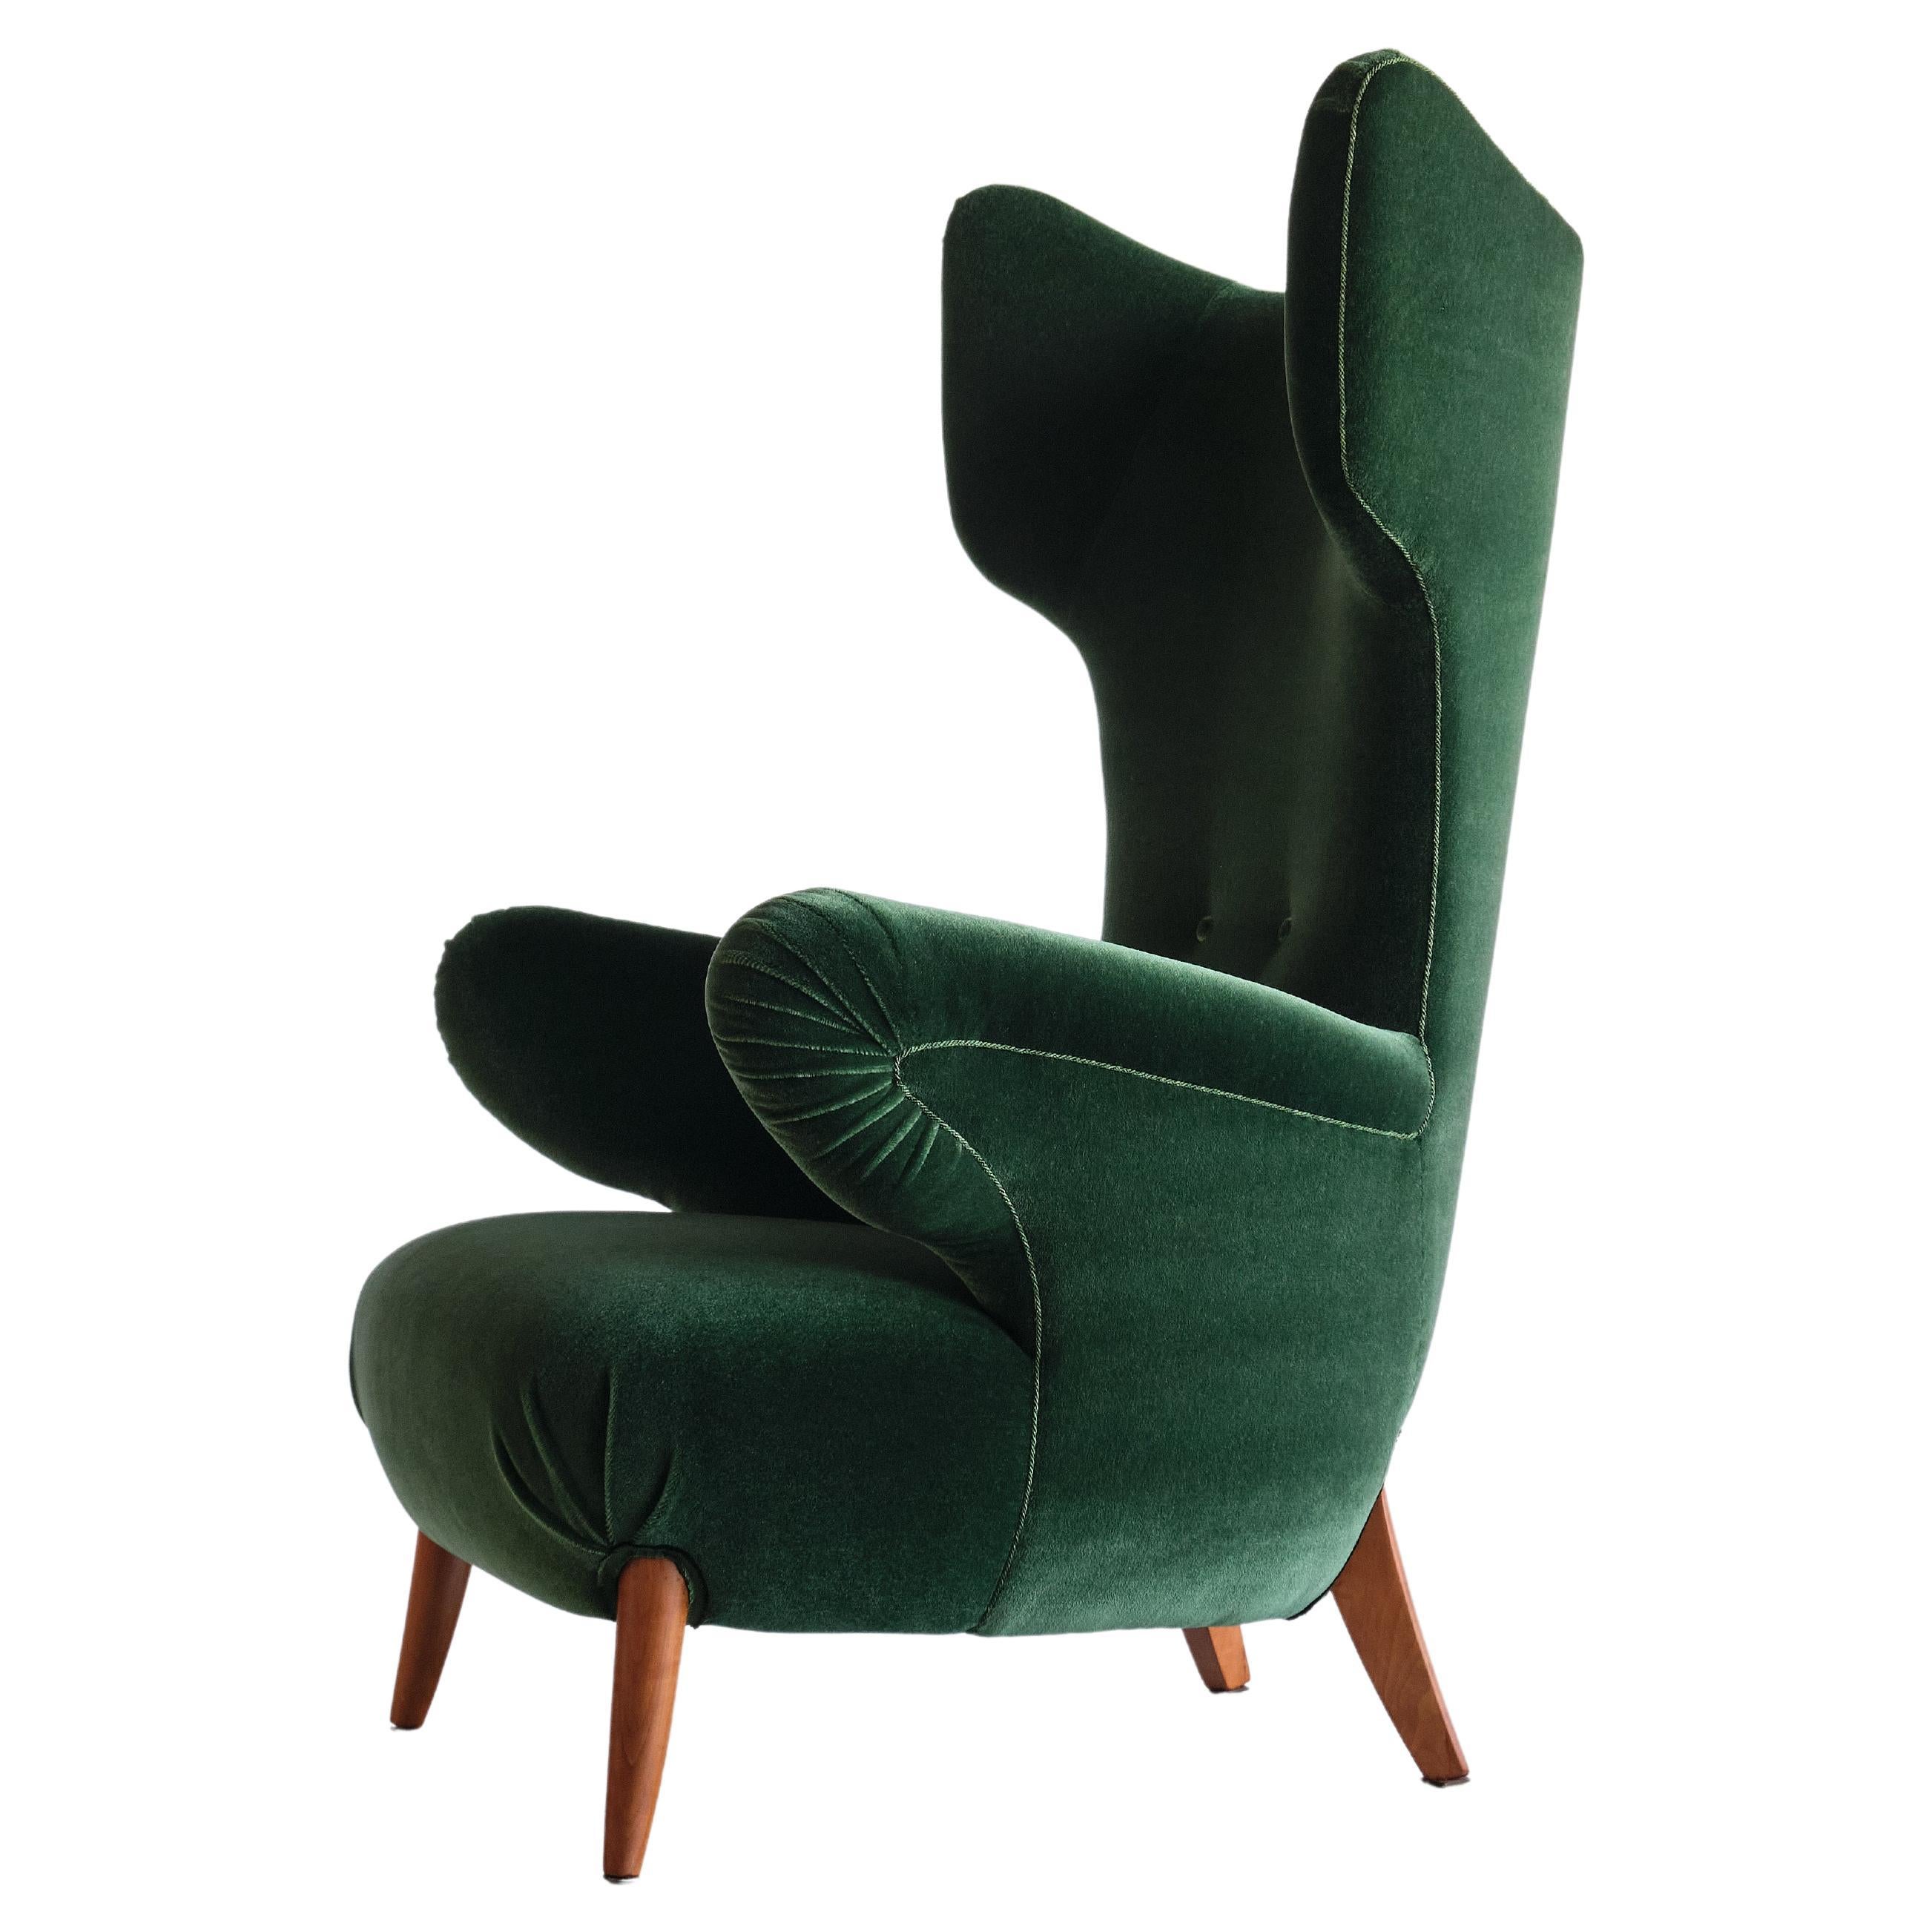 Important Ottorino Aloisio Wingback Chair in Green Mohair, Colli, Italy, 1957 For Sale